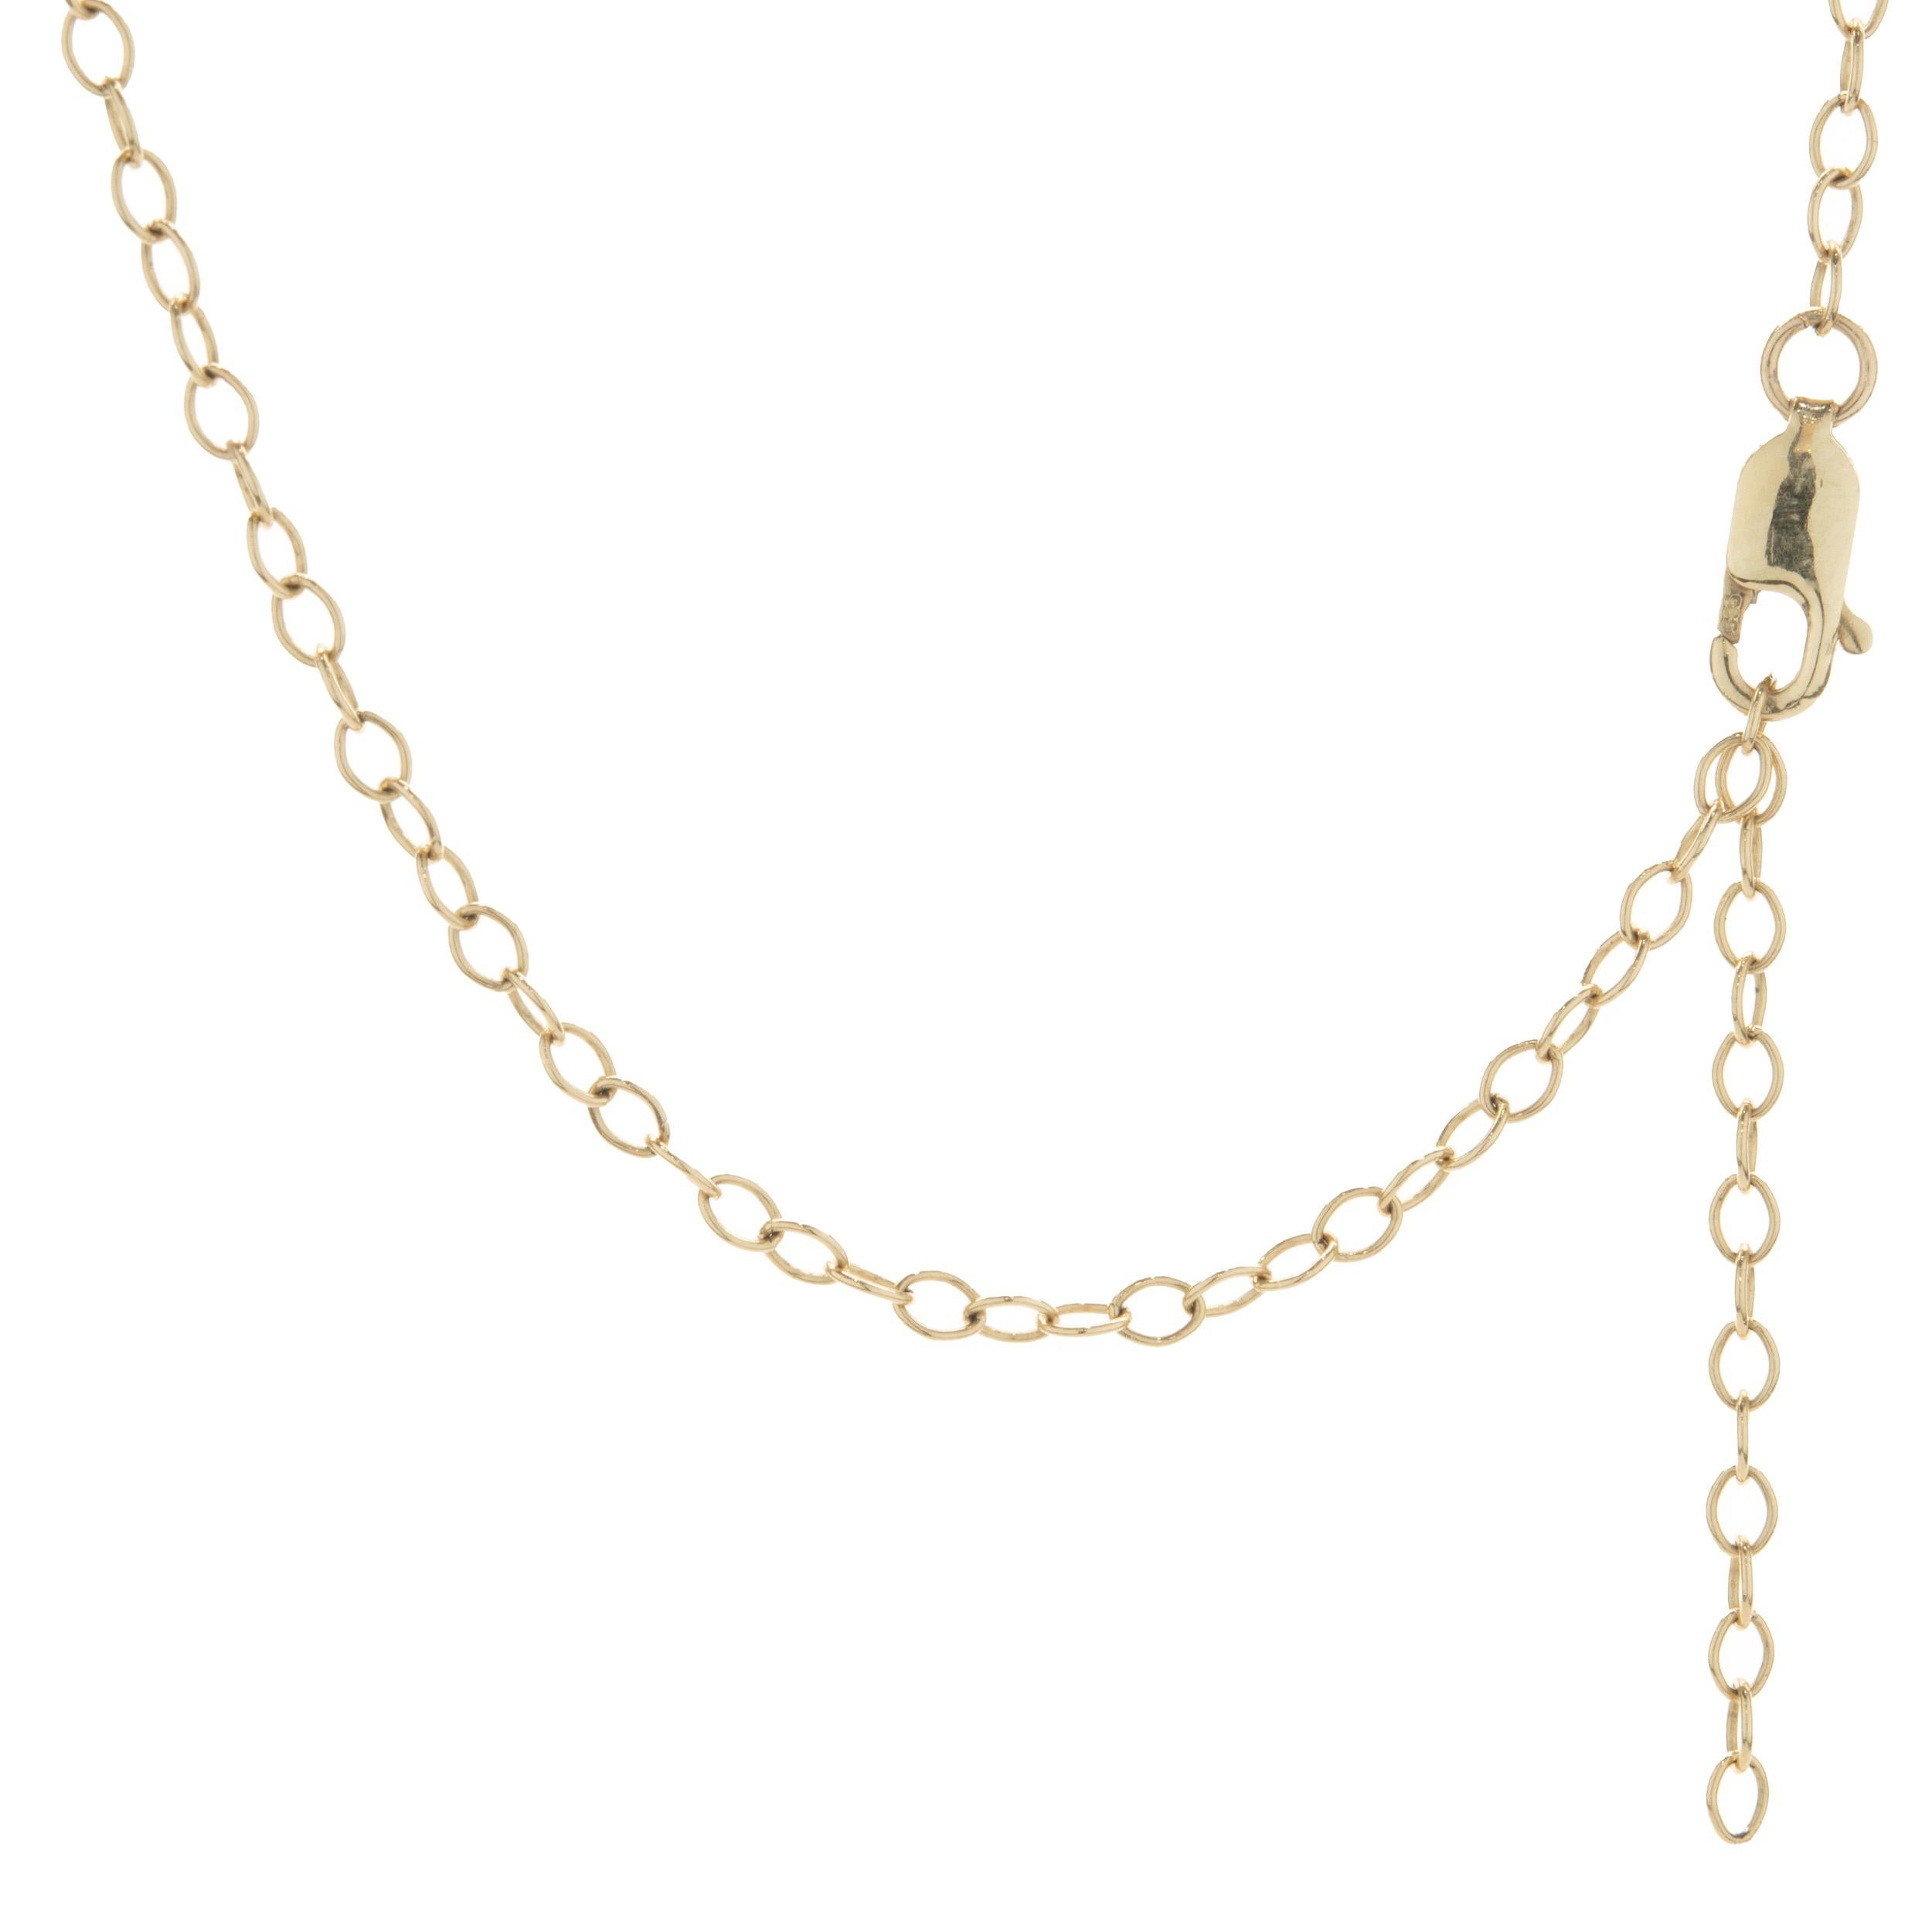 gold lariat necklace with diamonds